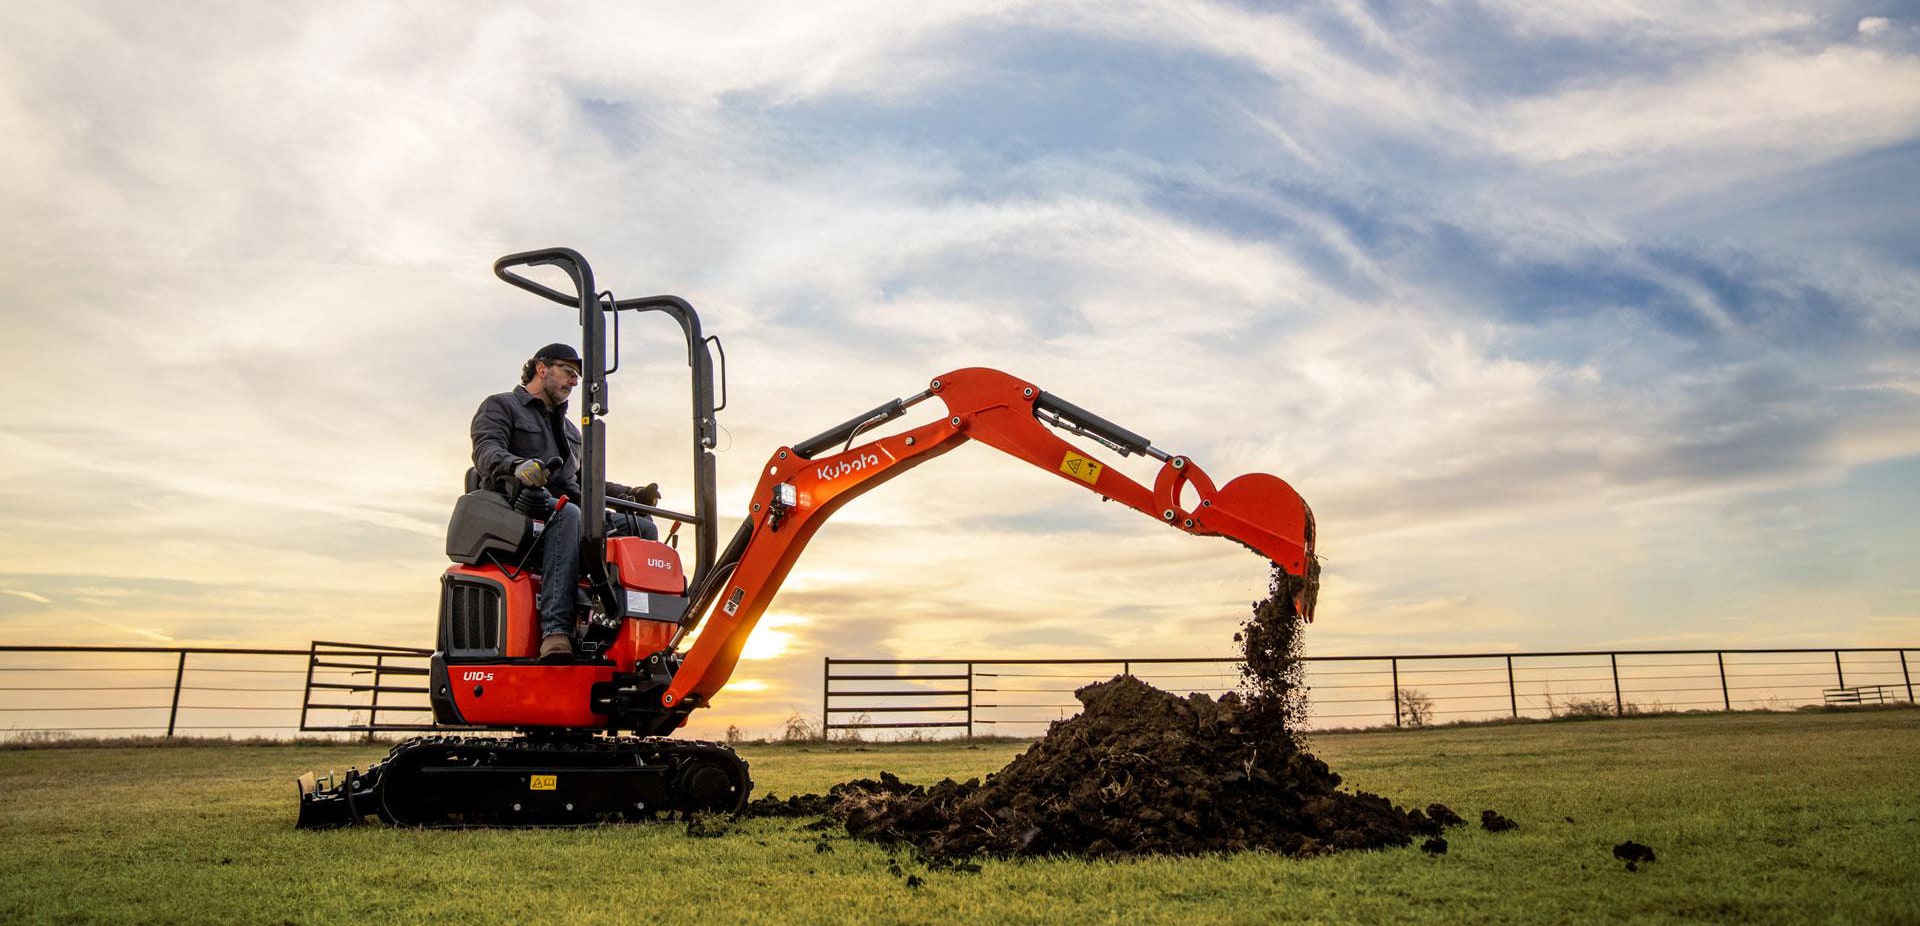 Kubota’s Newest Compact Excavator, the U10-5, Receives Multiple Industry Awards and Recognition in 2022